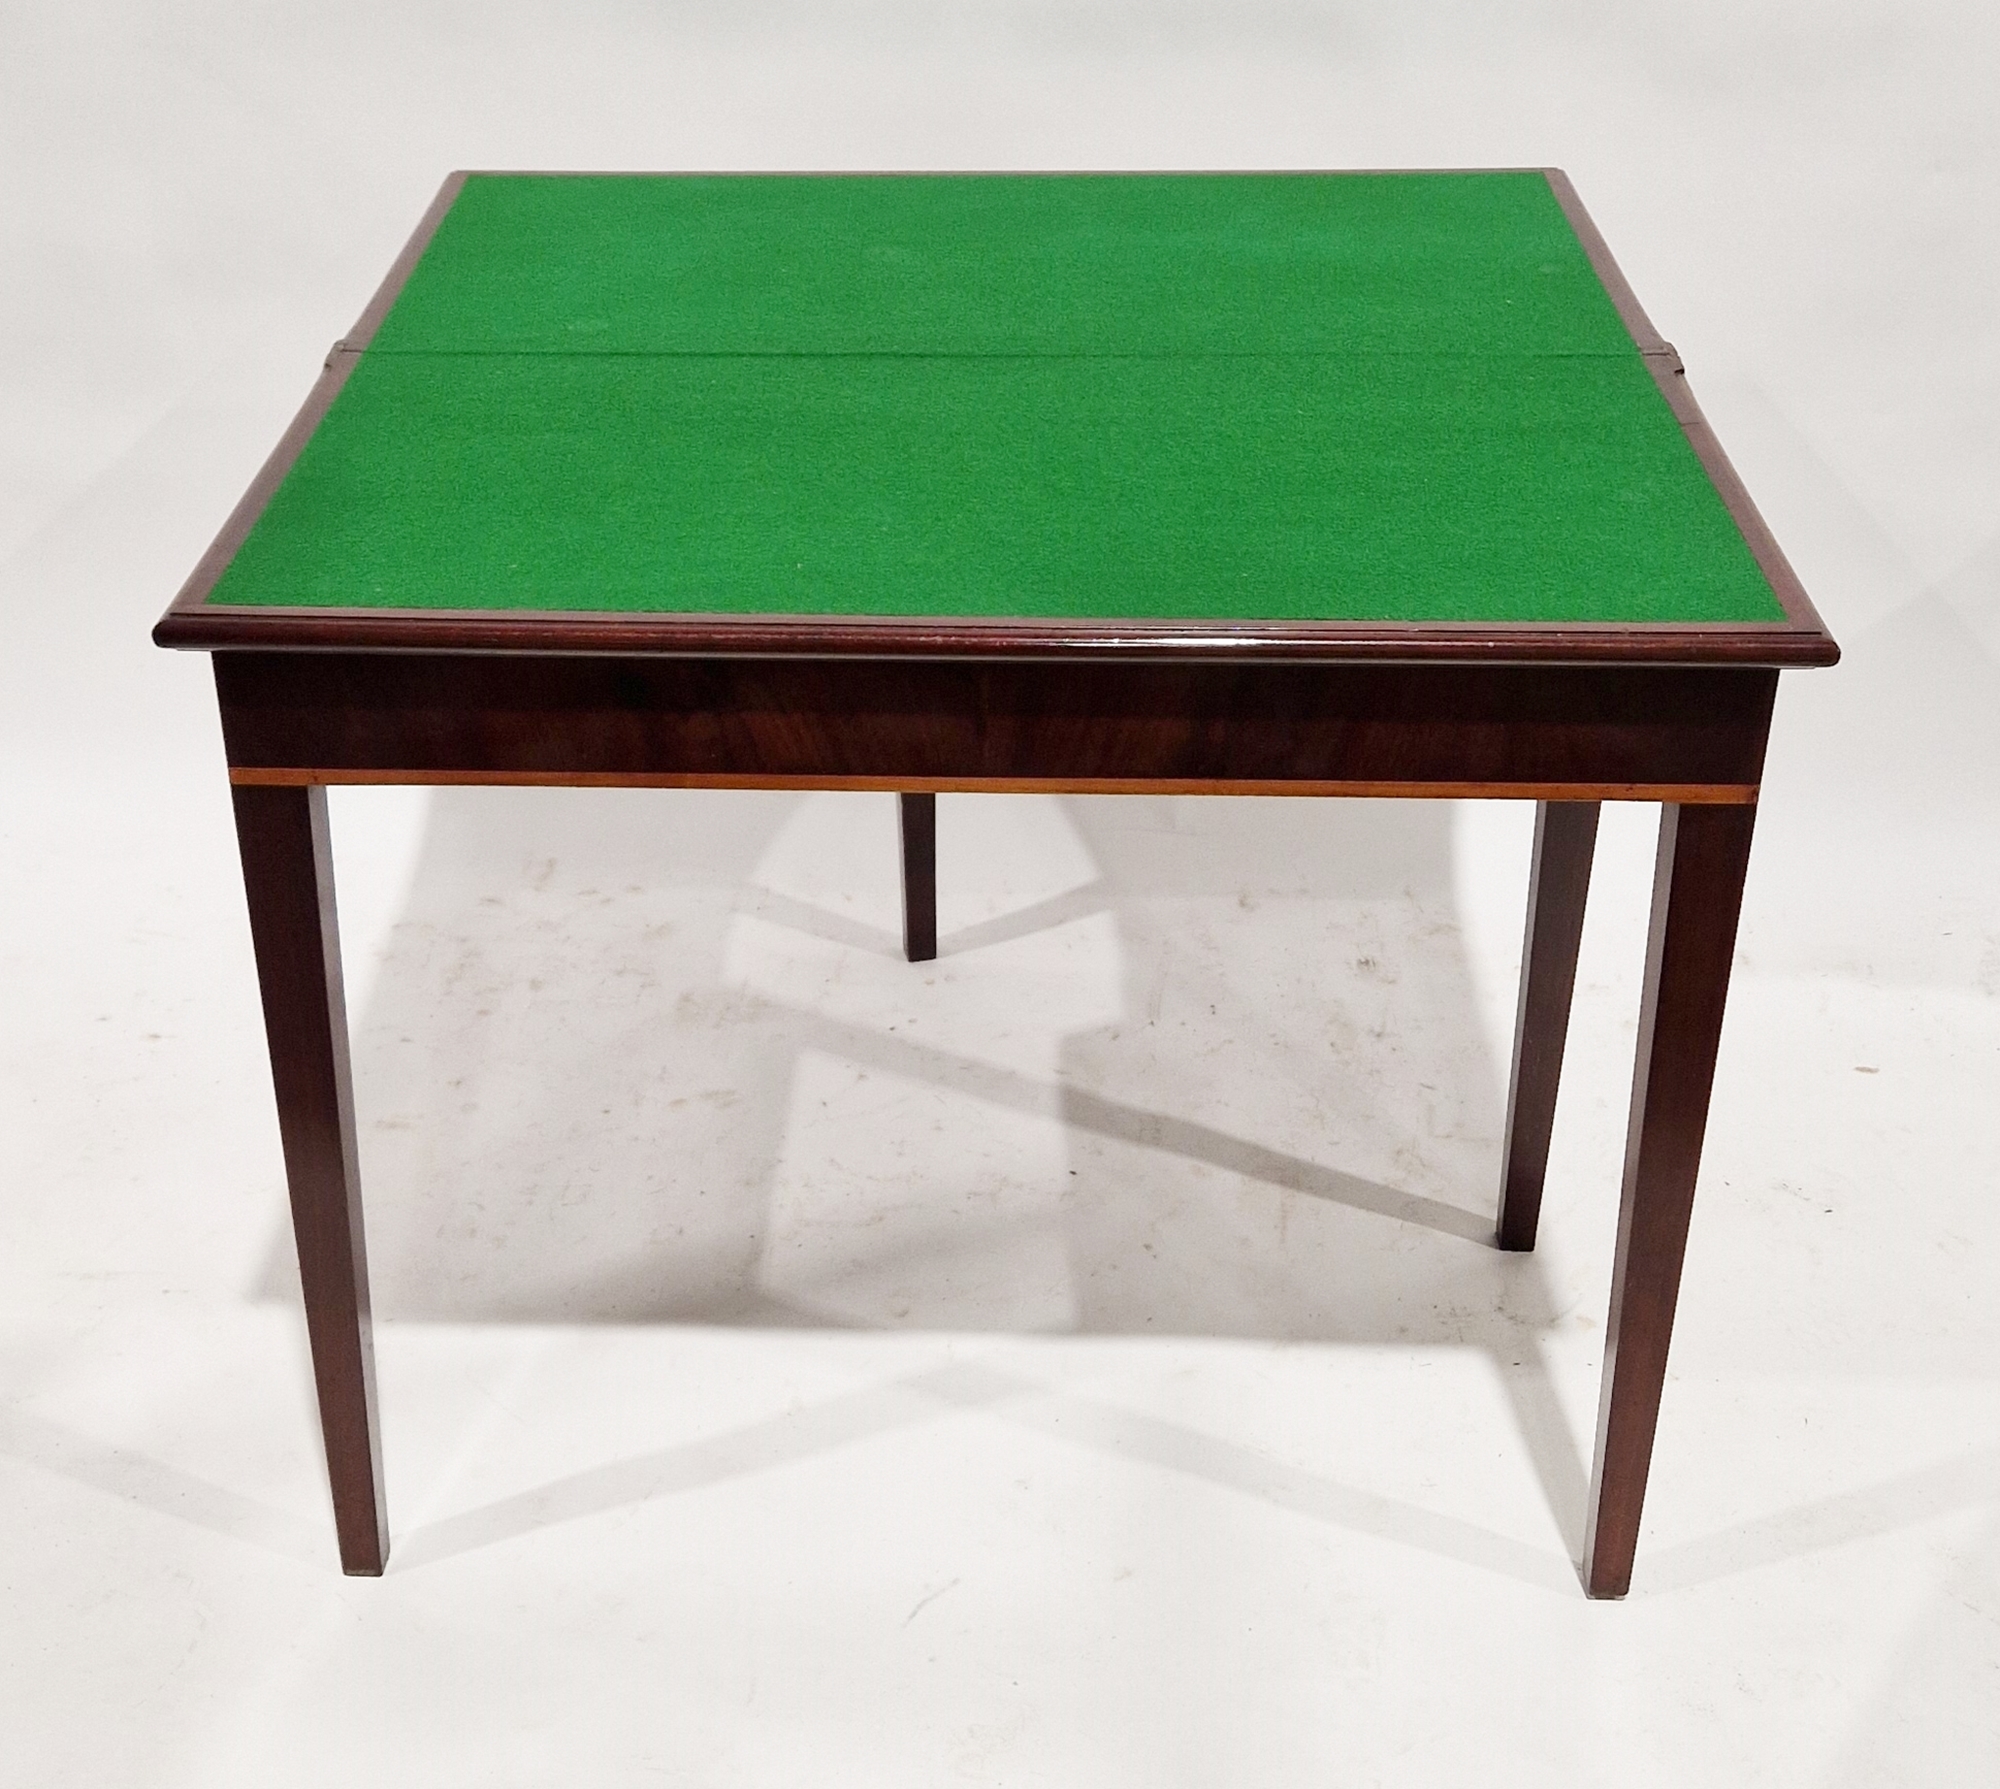 Georgian mahogany folding card table with satinwood inlaid border, opening to reveal a green baize - Image 2 of 2